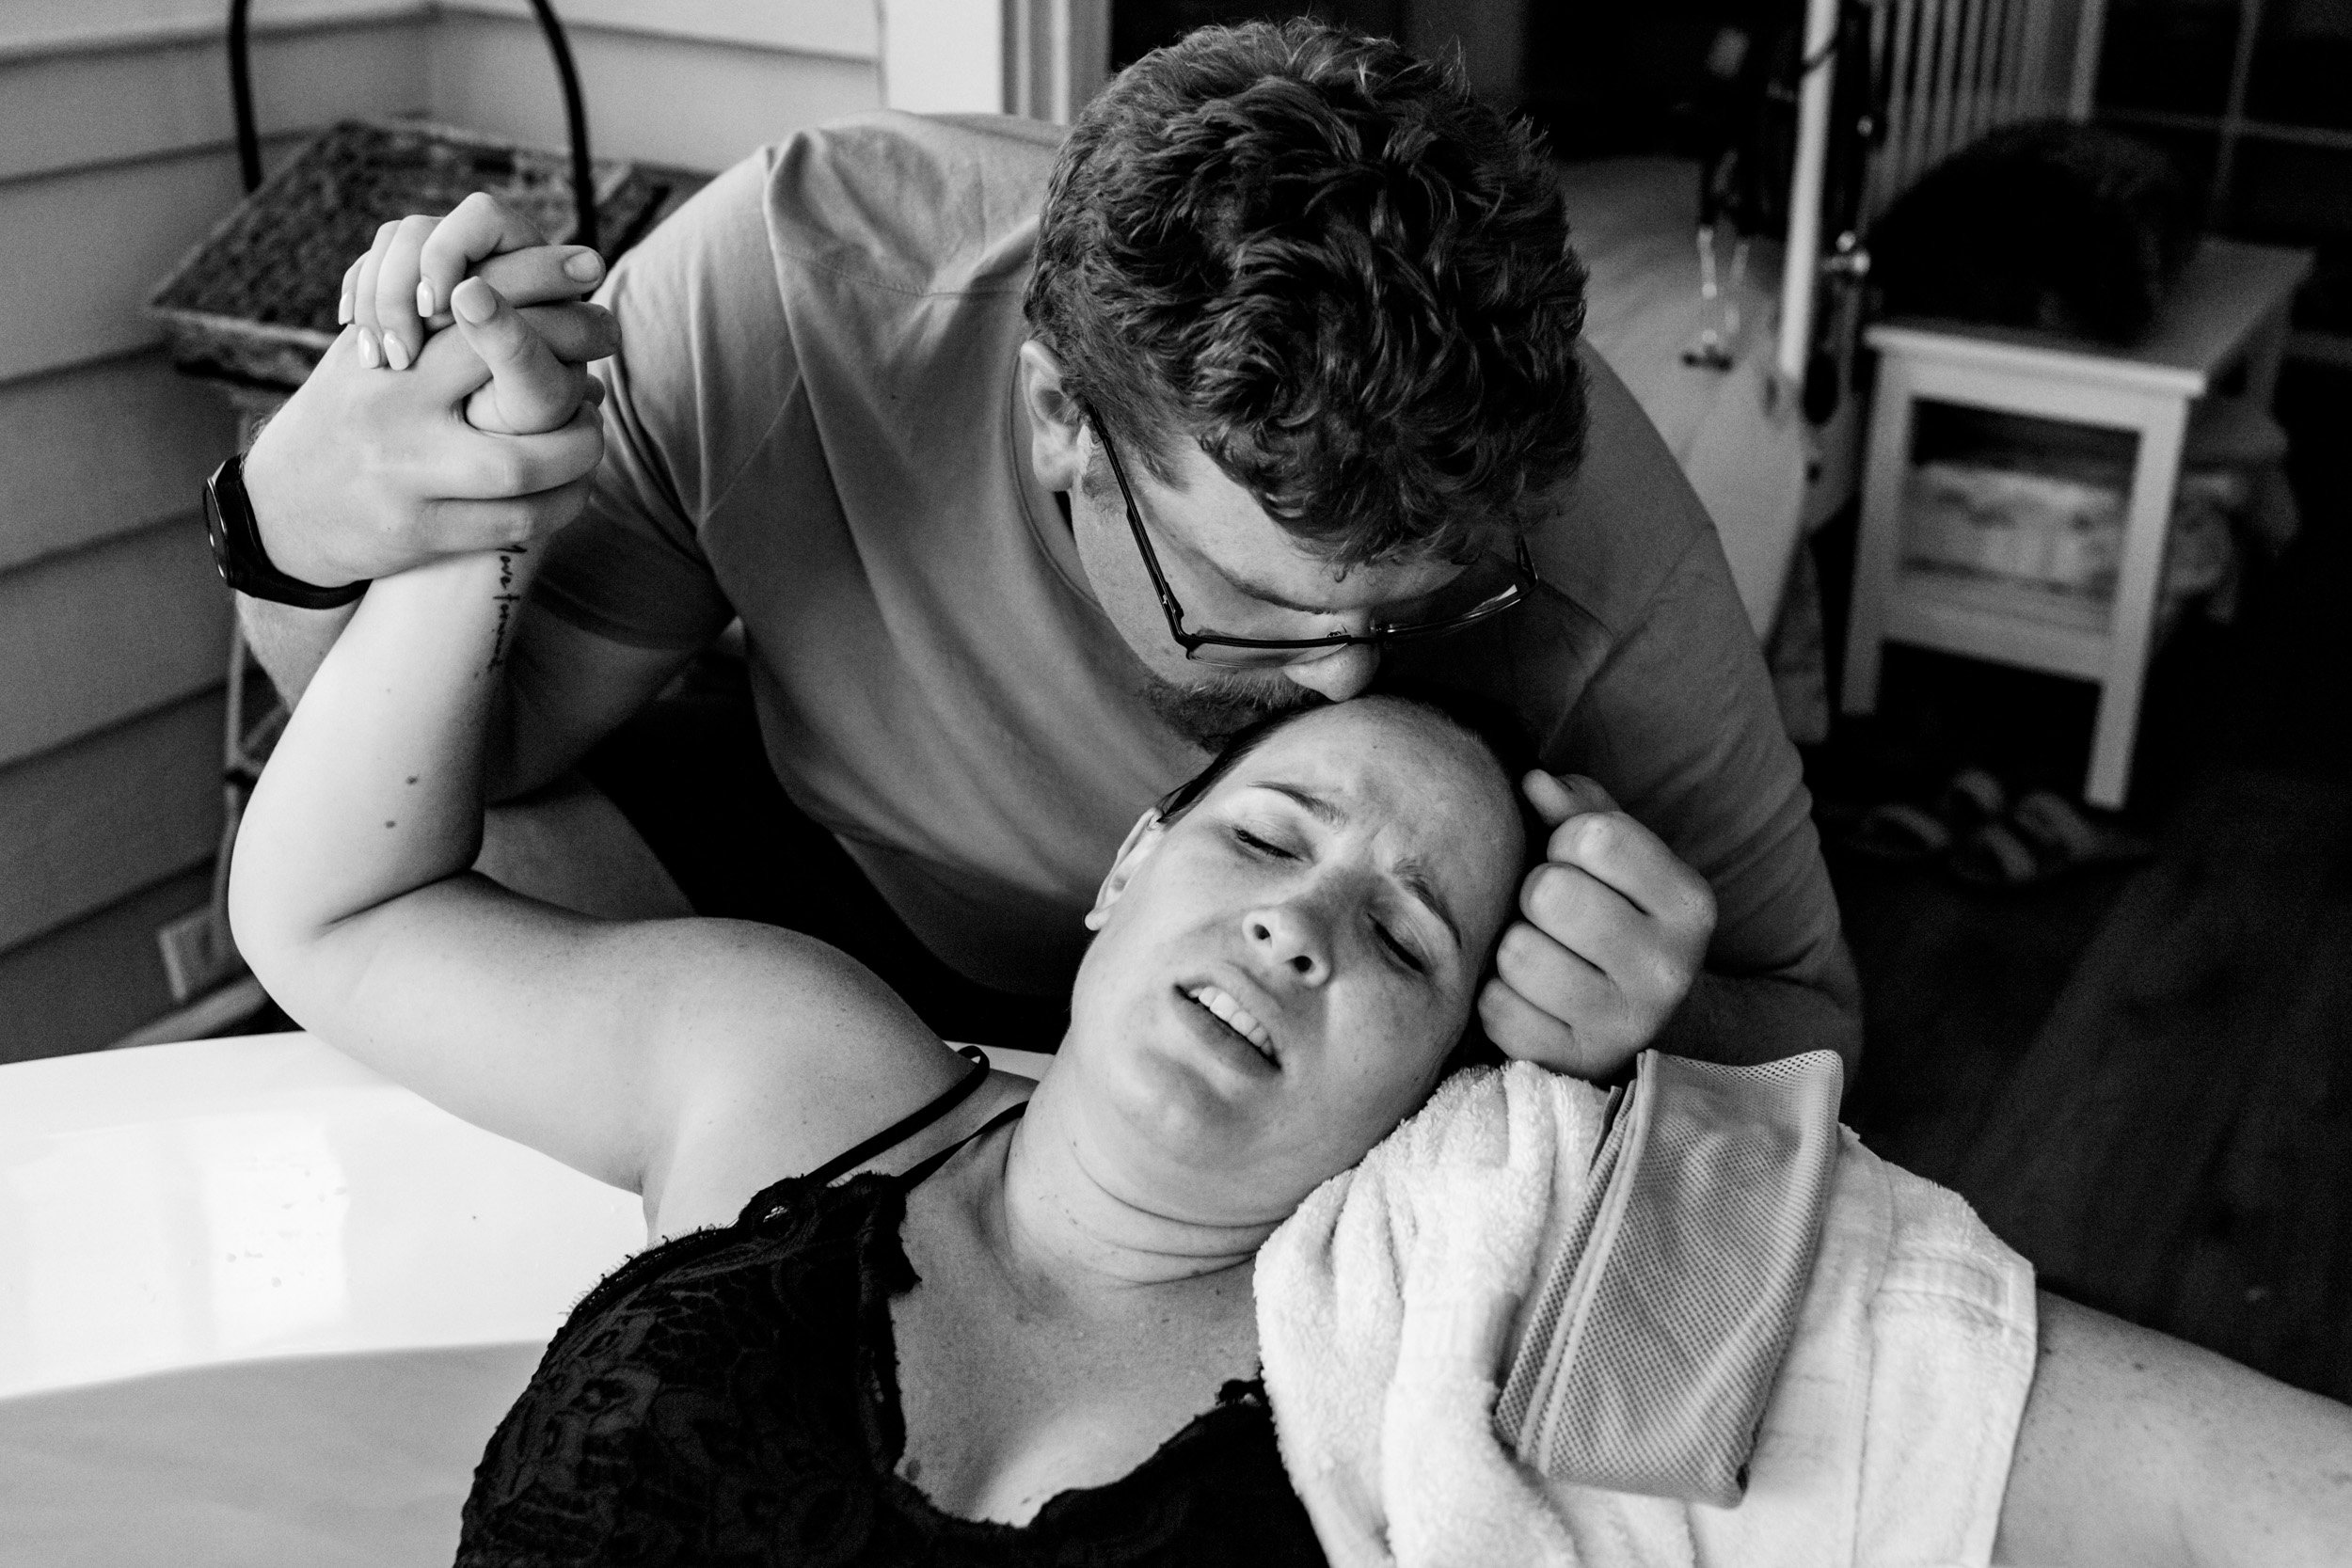 fiance supporting birth mom during labor by giving her a kiss on the head